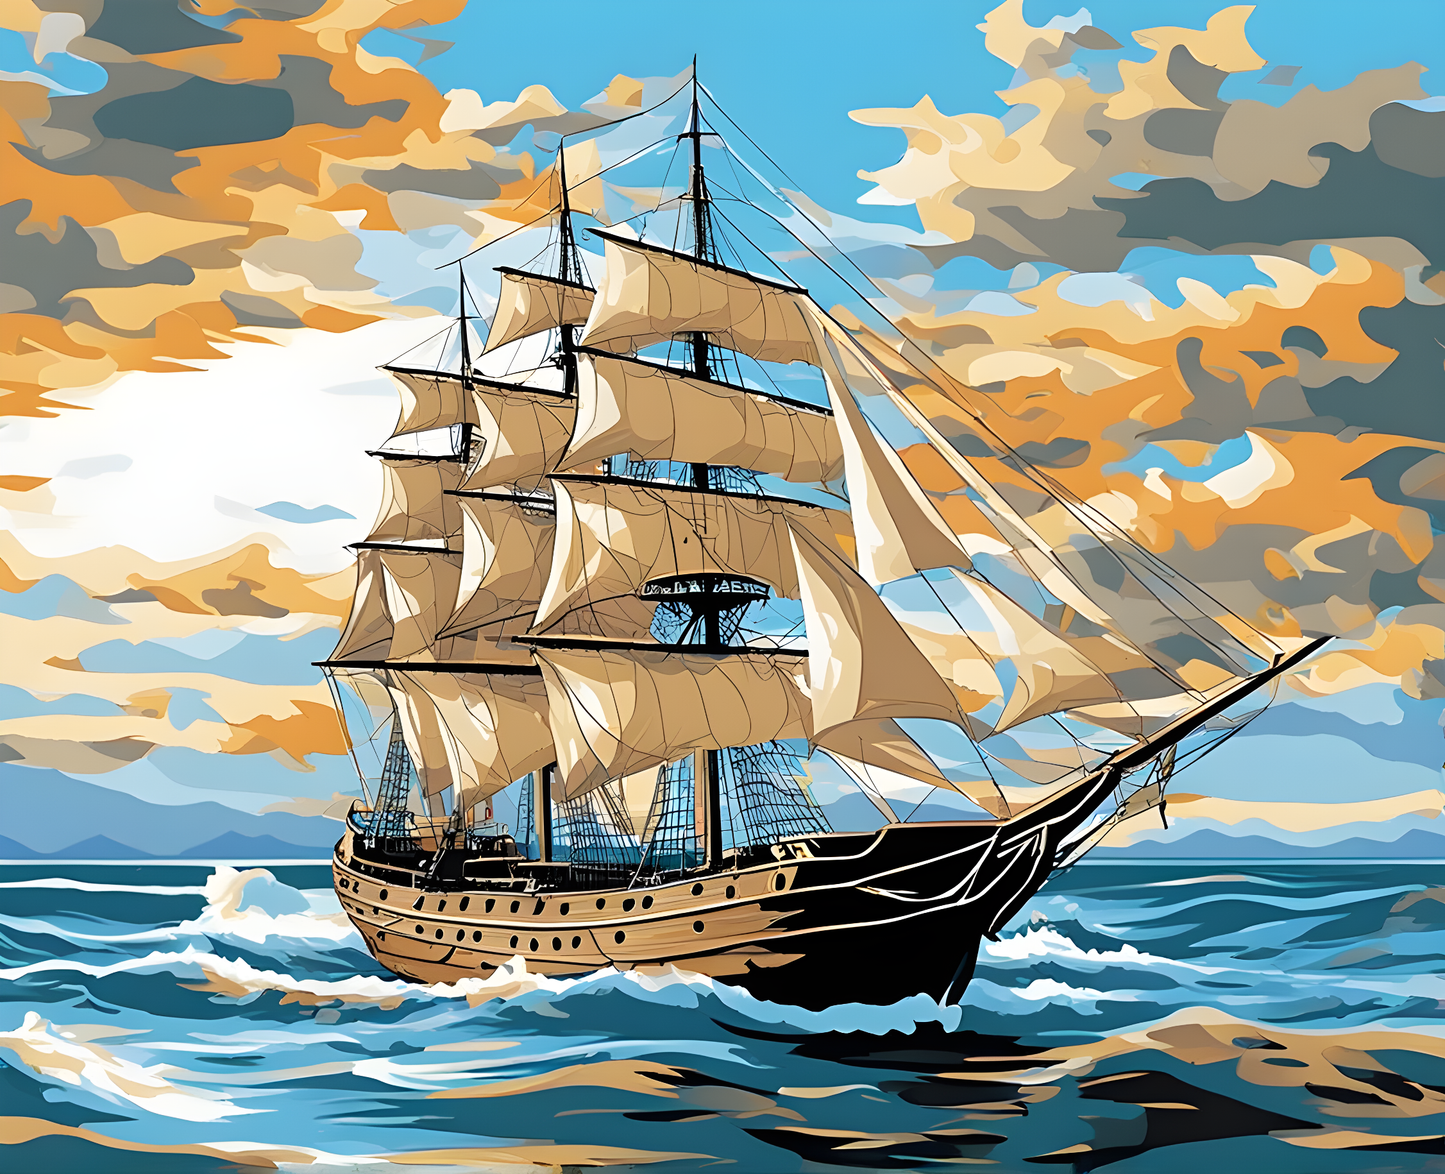 Sailing Ship on a Calm Sea - Van-Go Paint-By-Number Kit